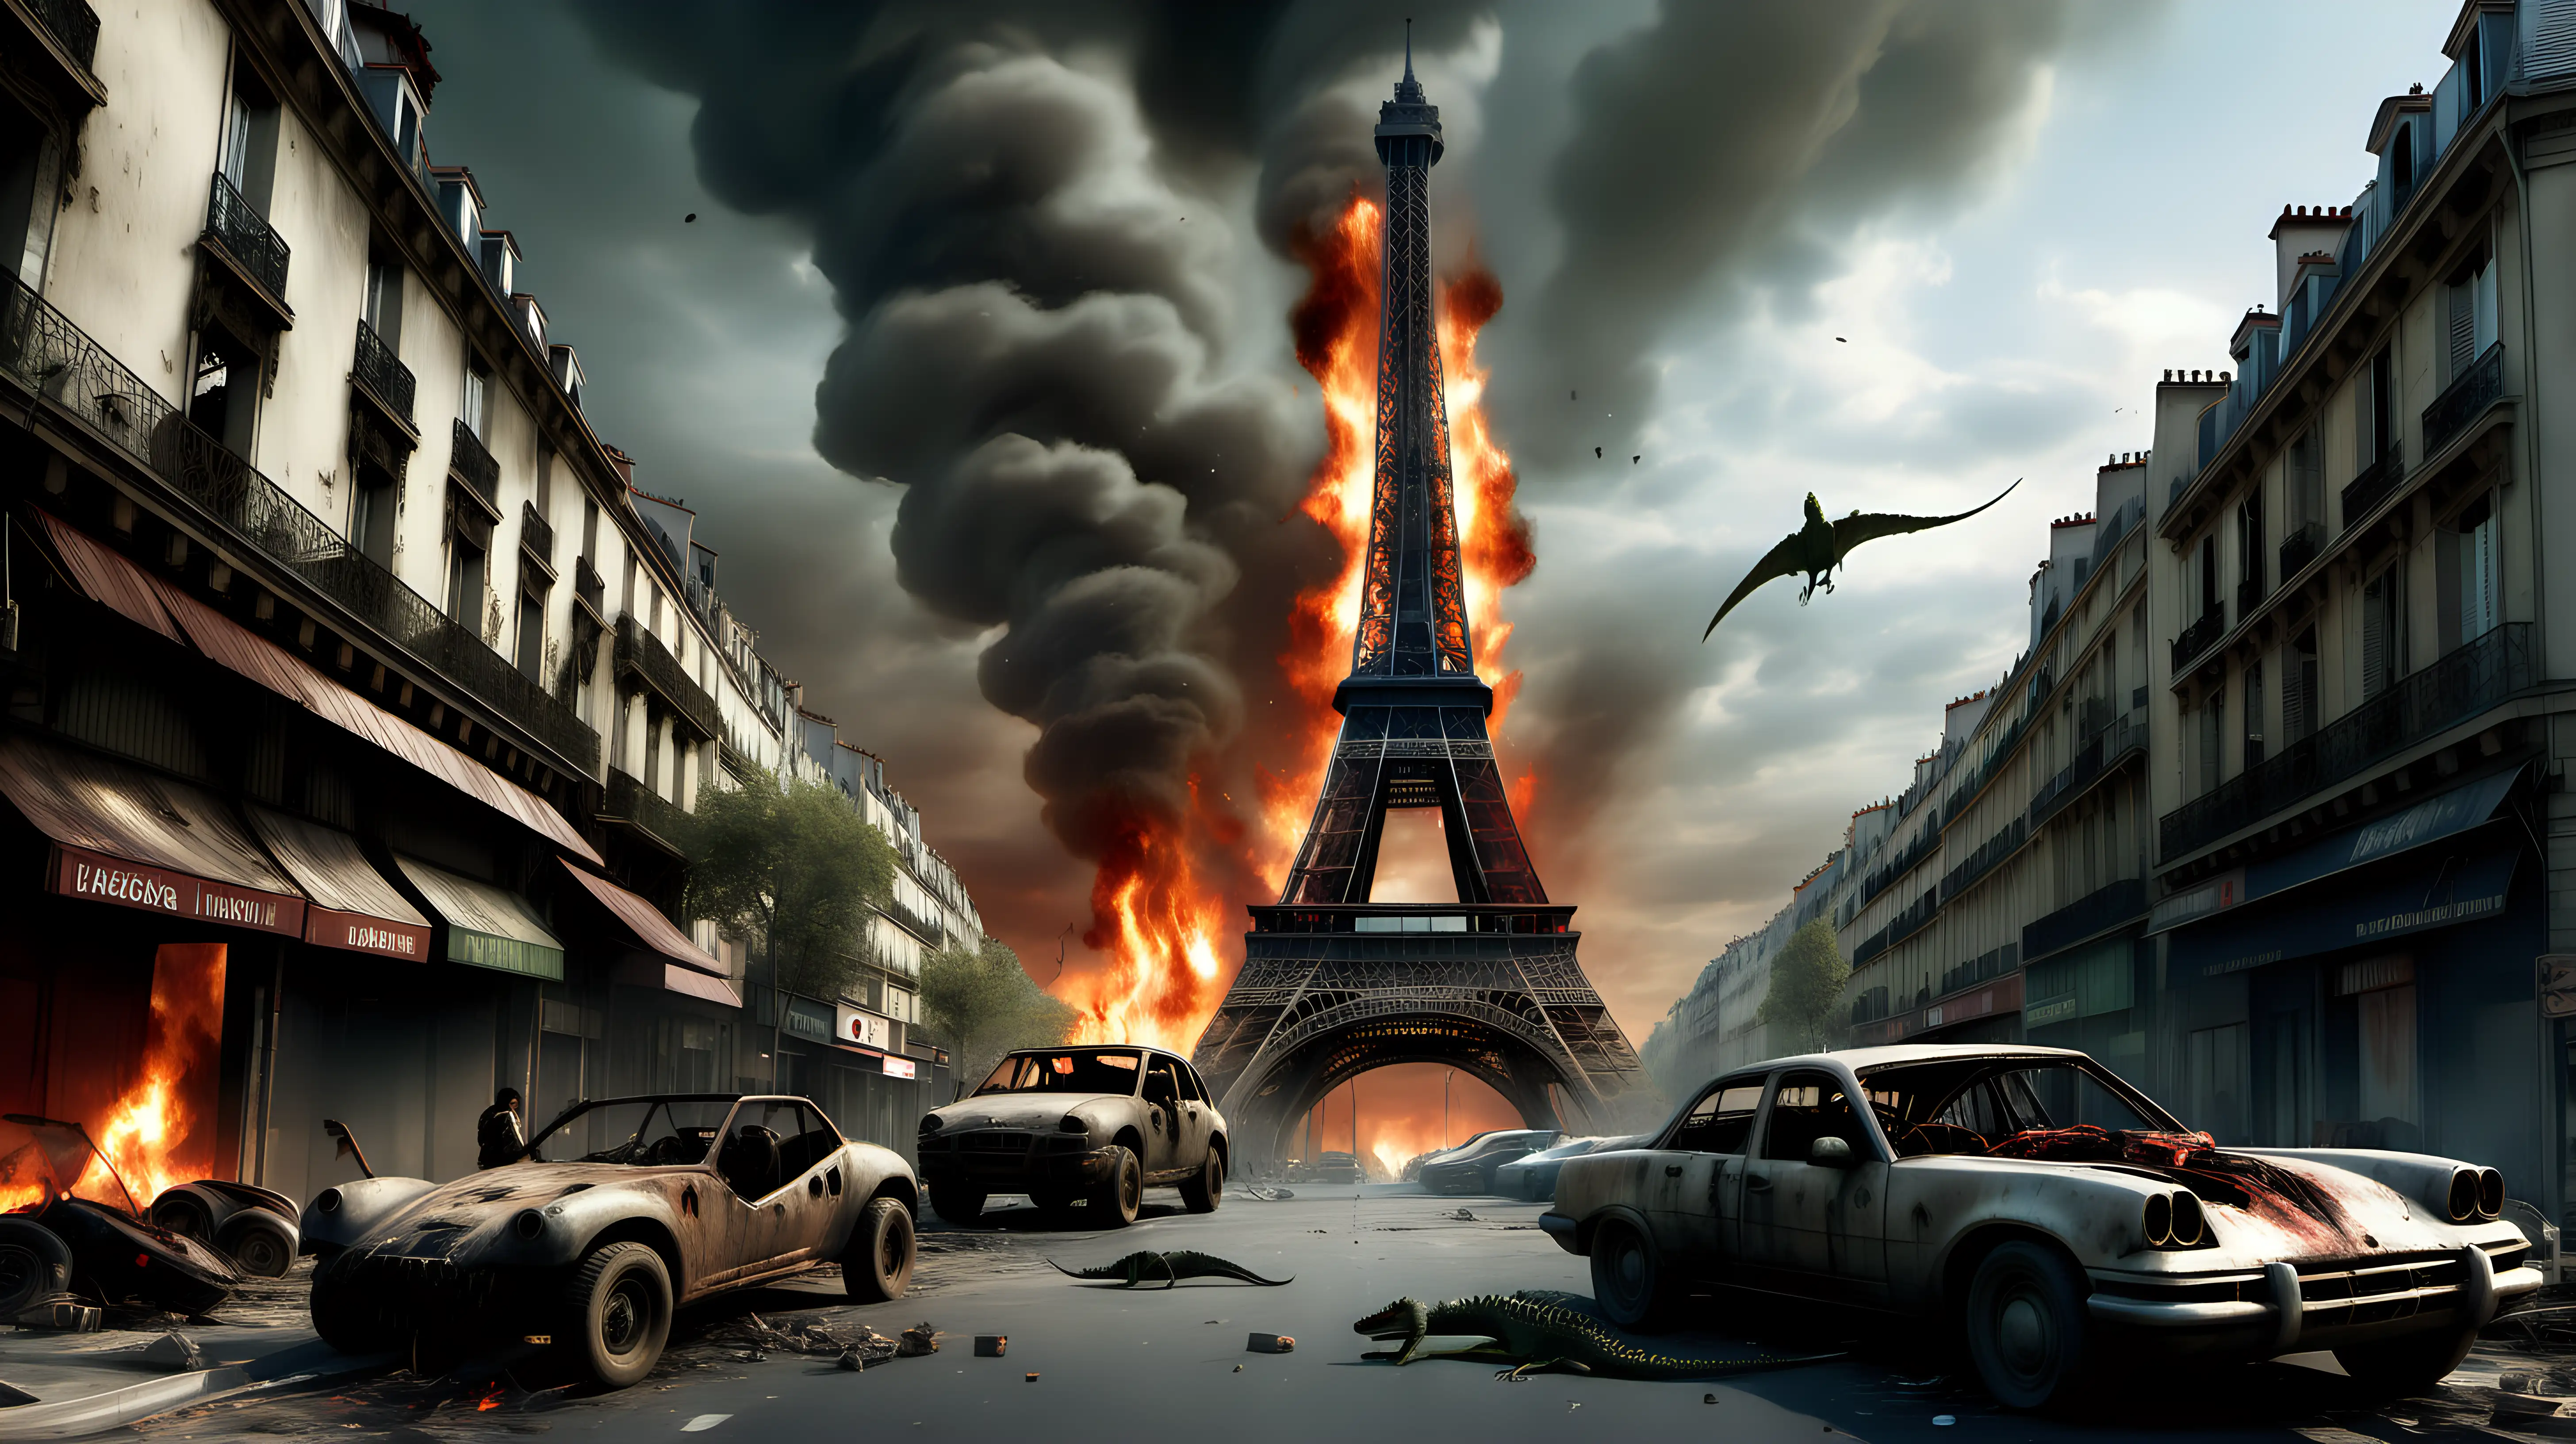 PostApocalyptic Eiffel Tower with Fire Damaged Cars and Crocodile